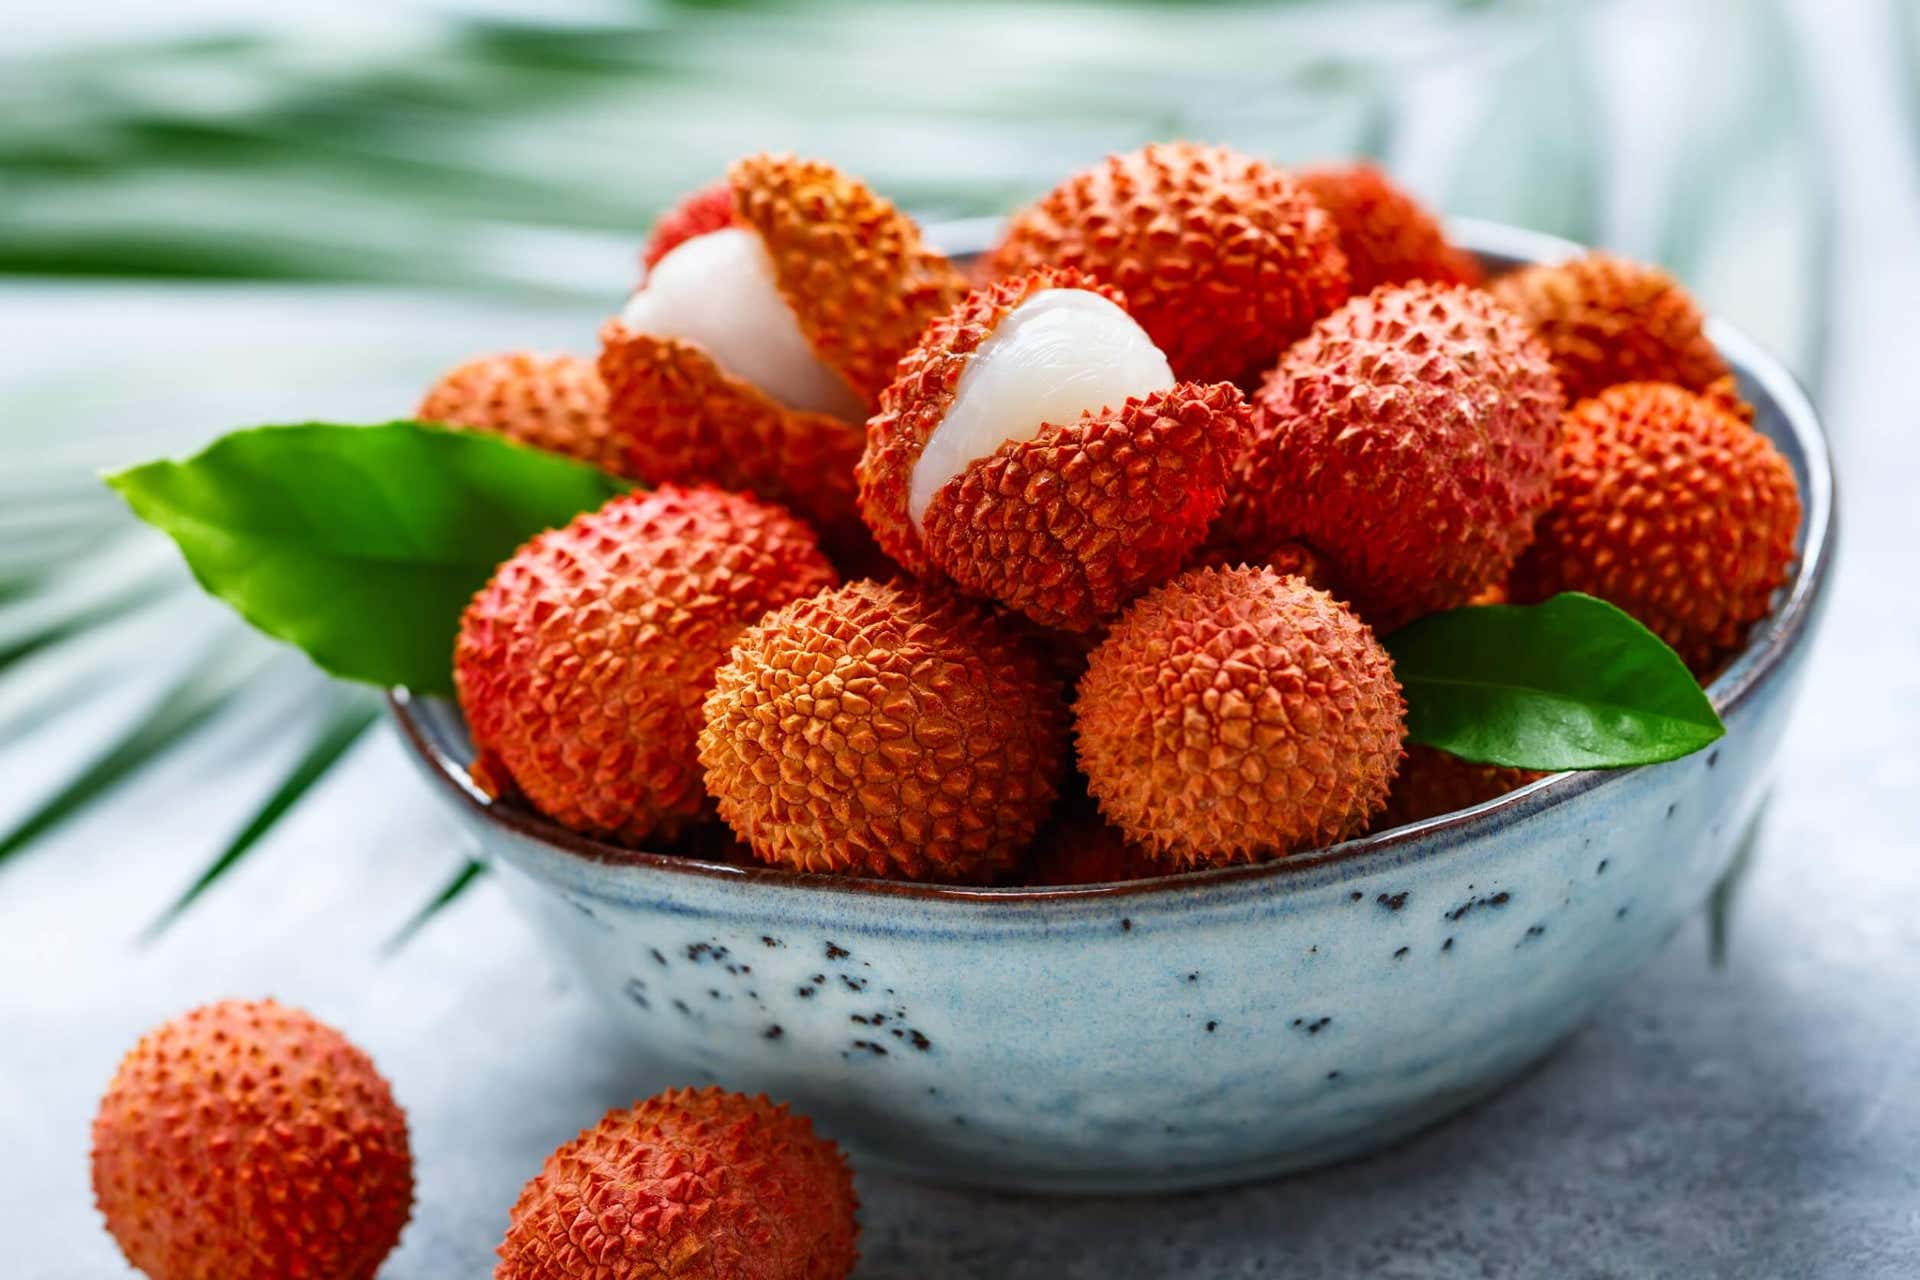 The lychee.